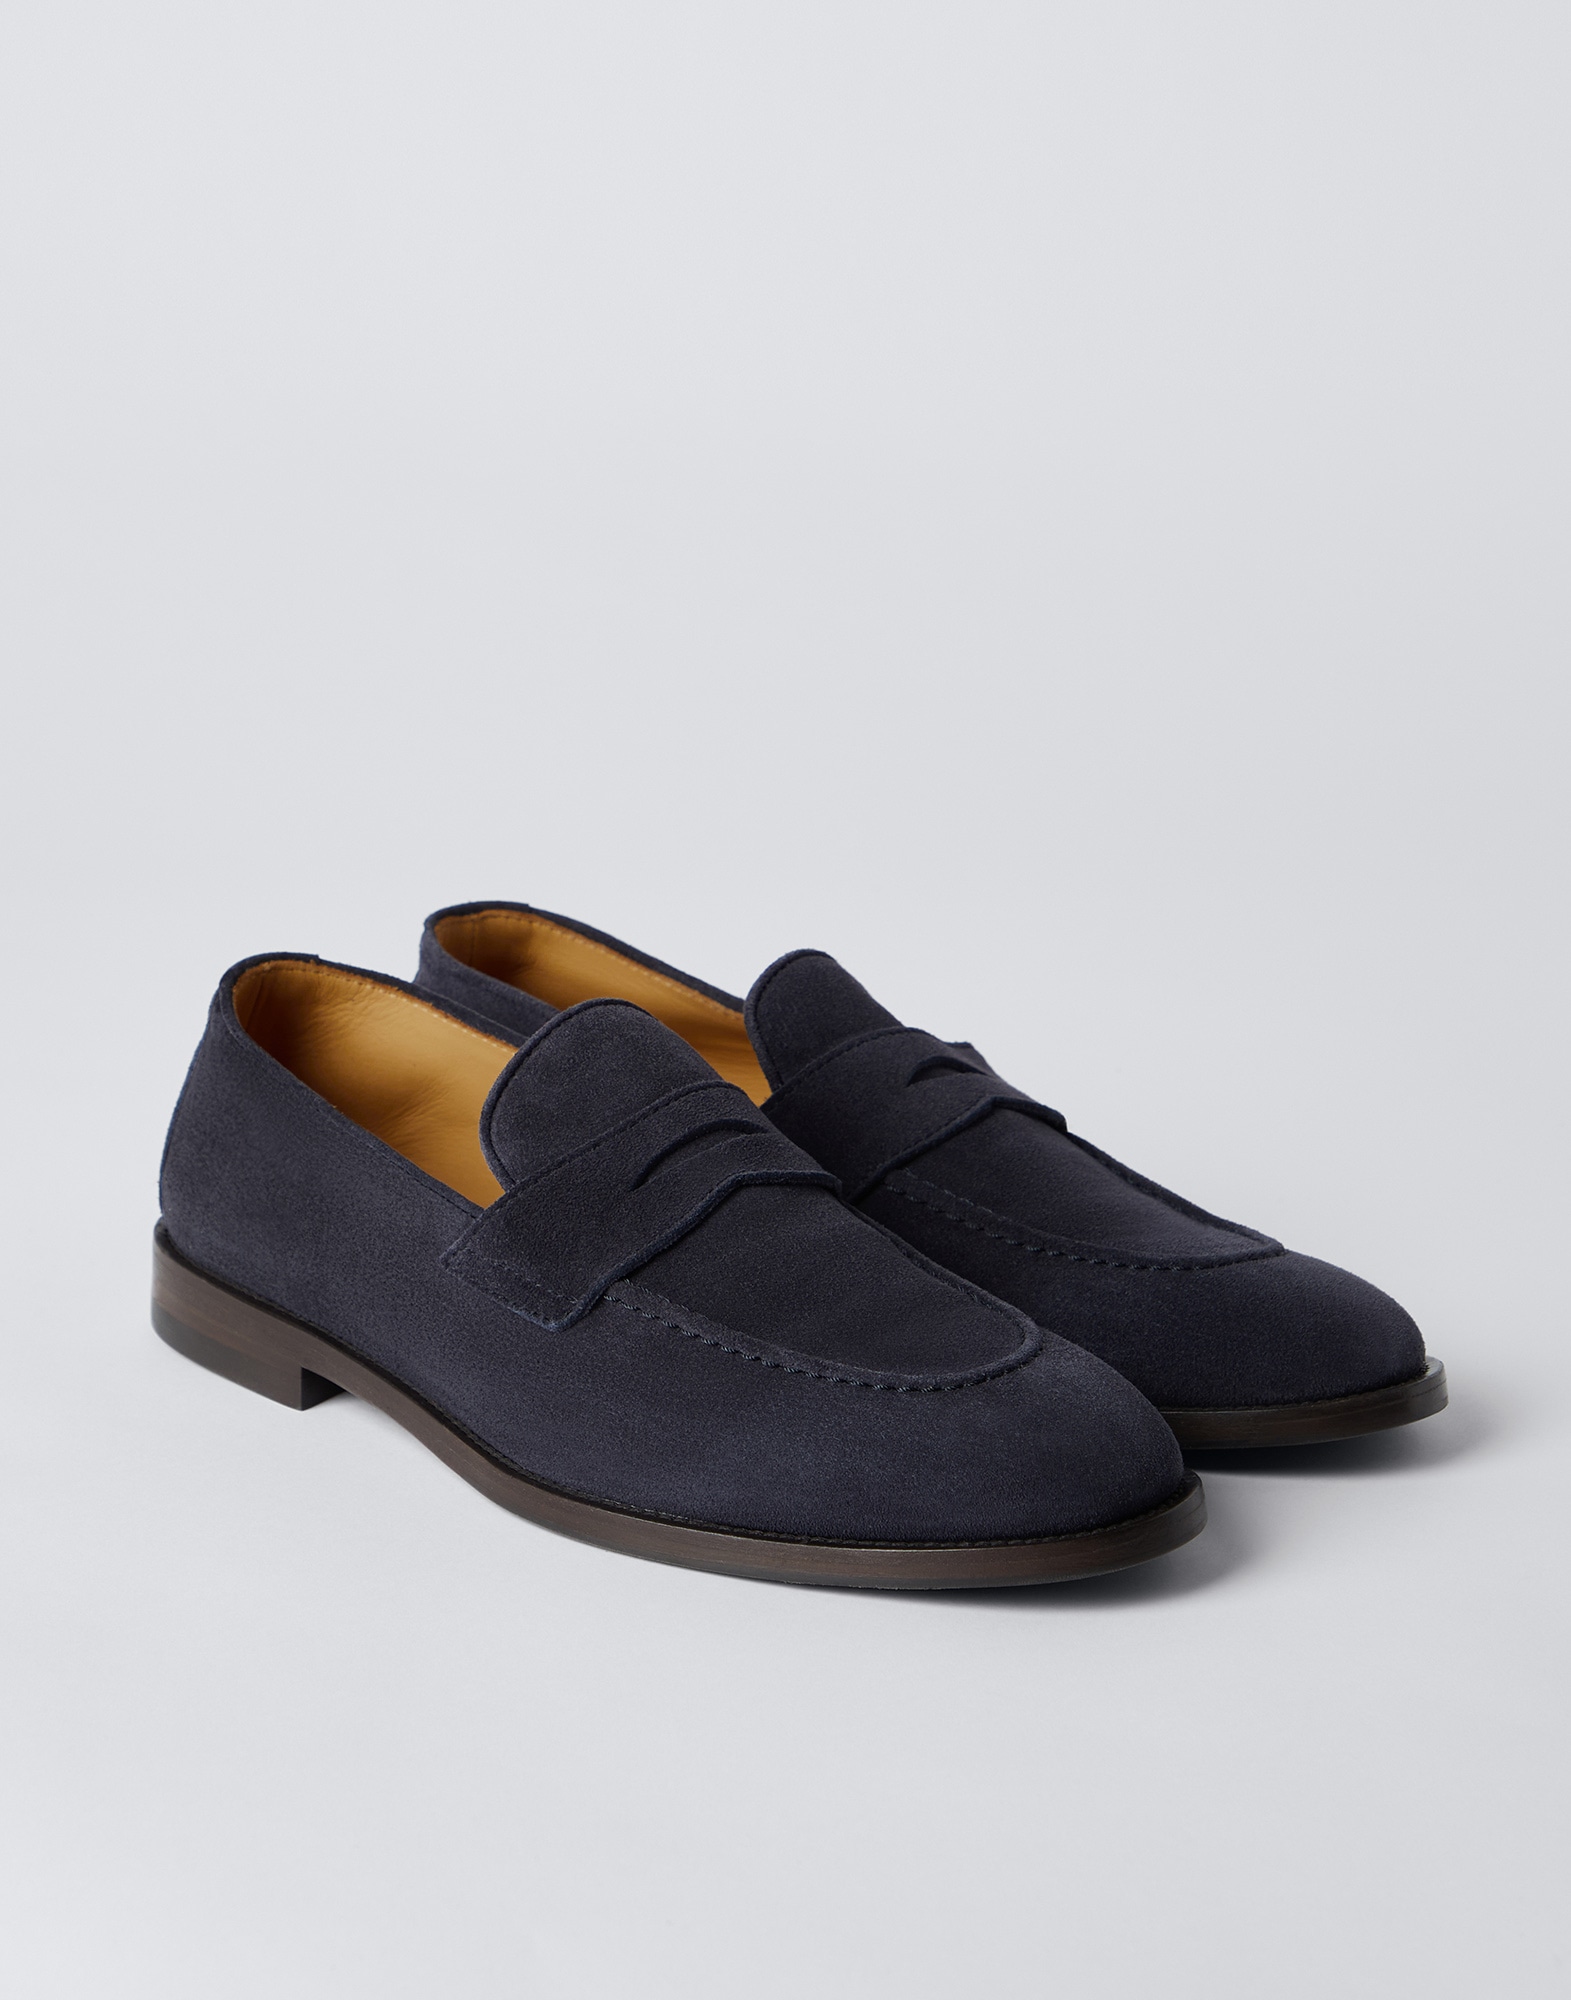 Penny loafers (232MZUCCLB872C813703) for Man Brunello